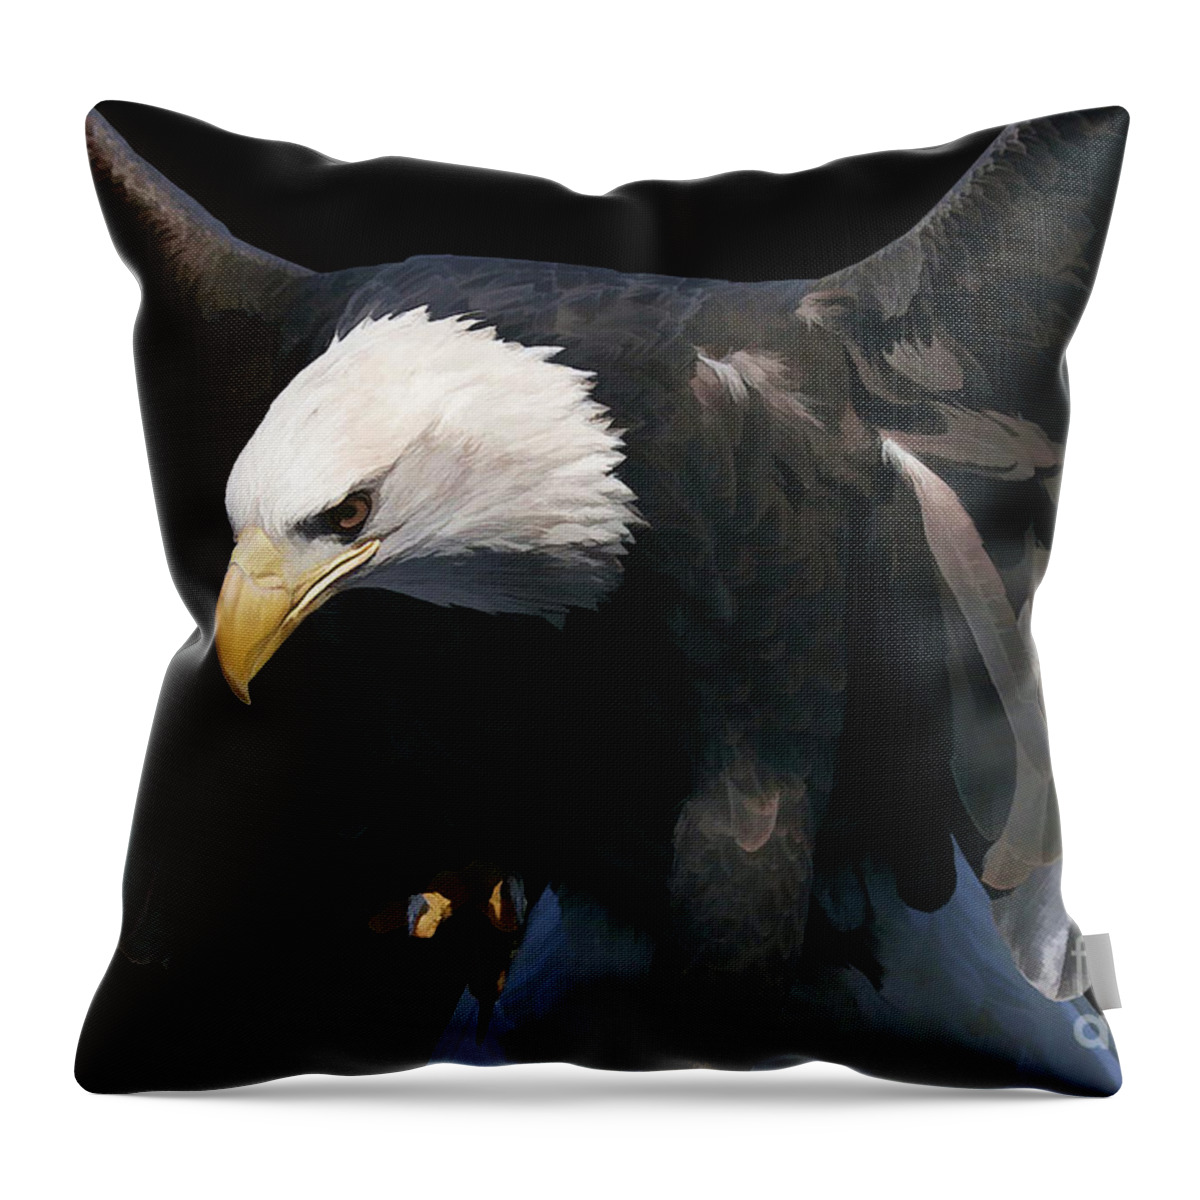 Us Army Throw Pillow featuring the digital art US Army Eagle by Tommy Anderson